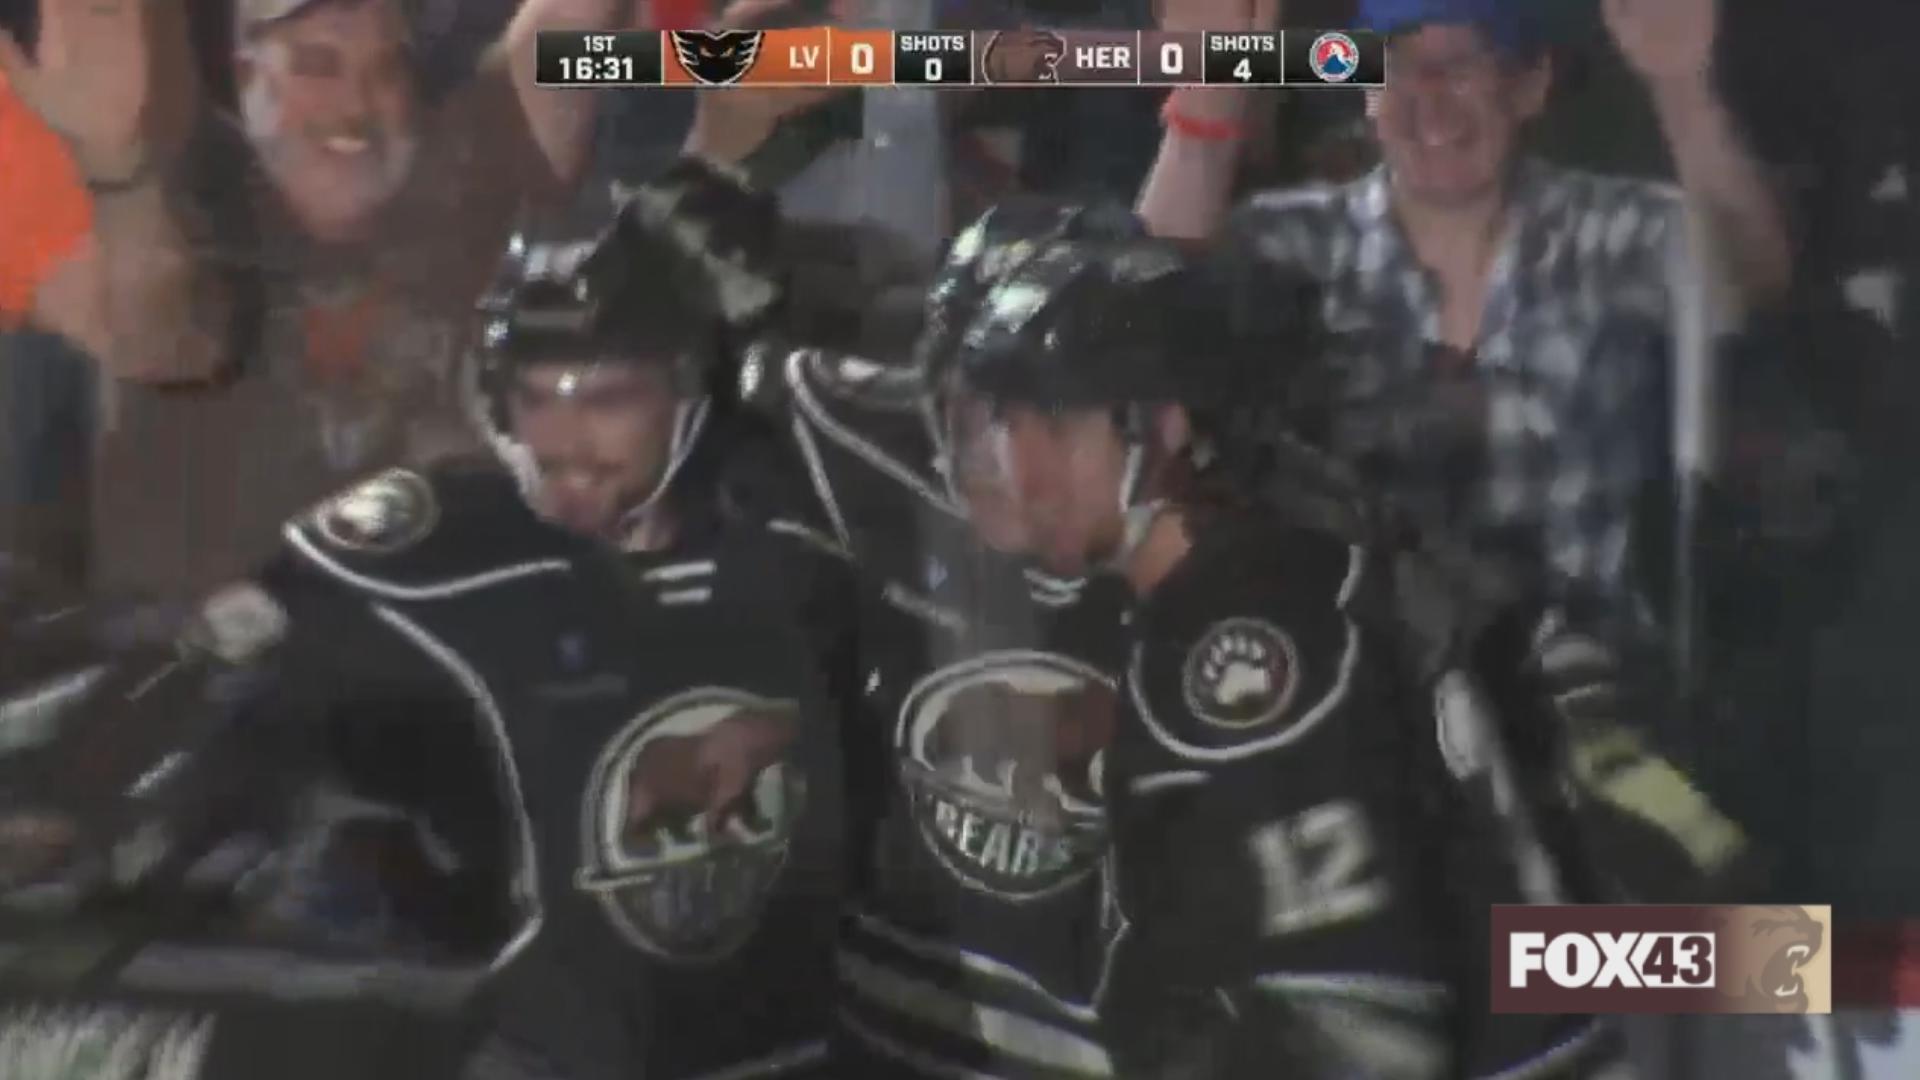 A look at the Hershey Bears win over the Lehigh Valley Phantoms in Game 1 of the Atlantic Division Semifinals.